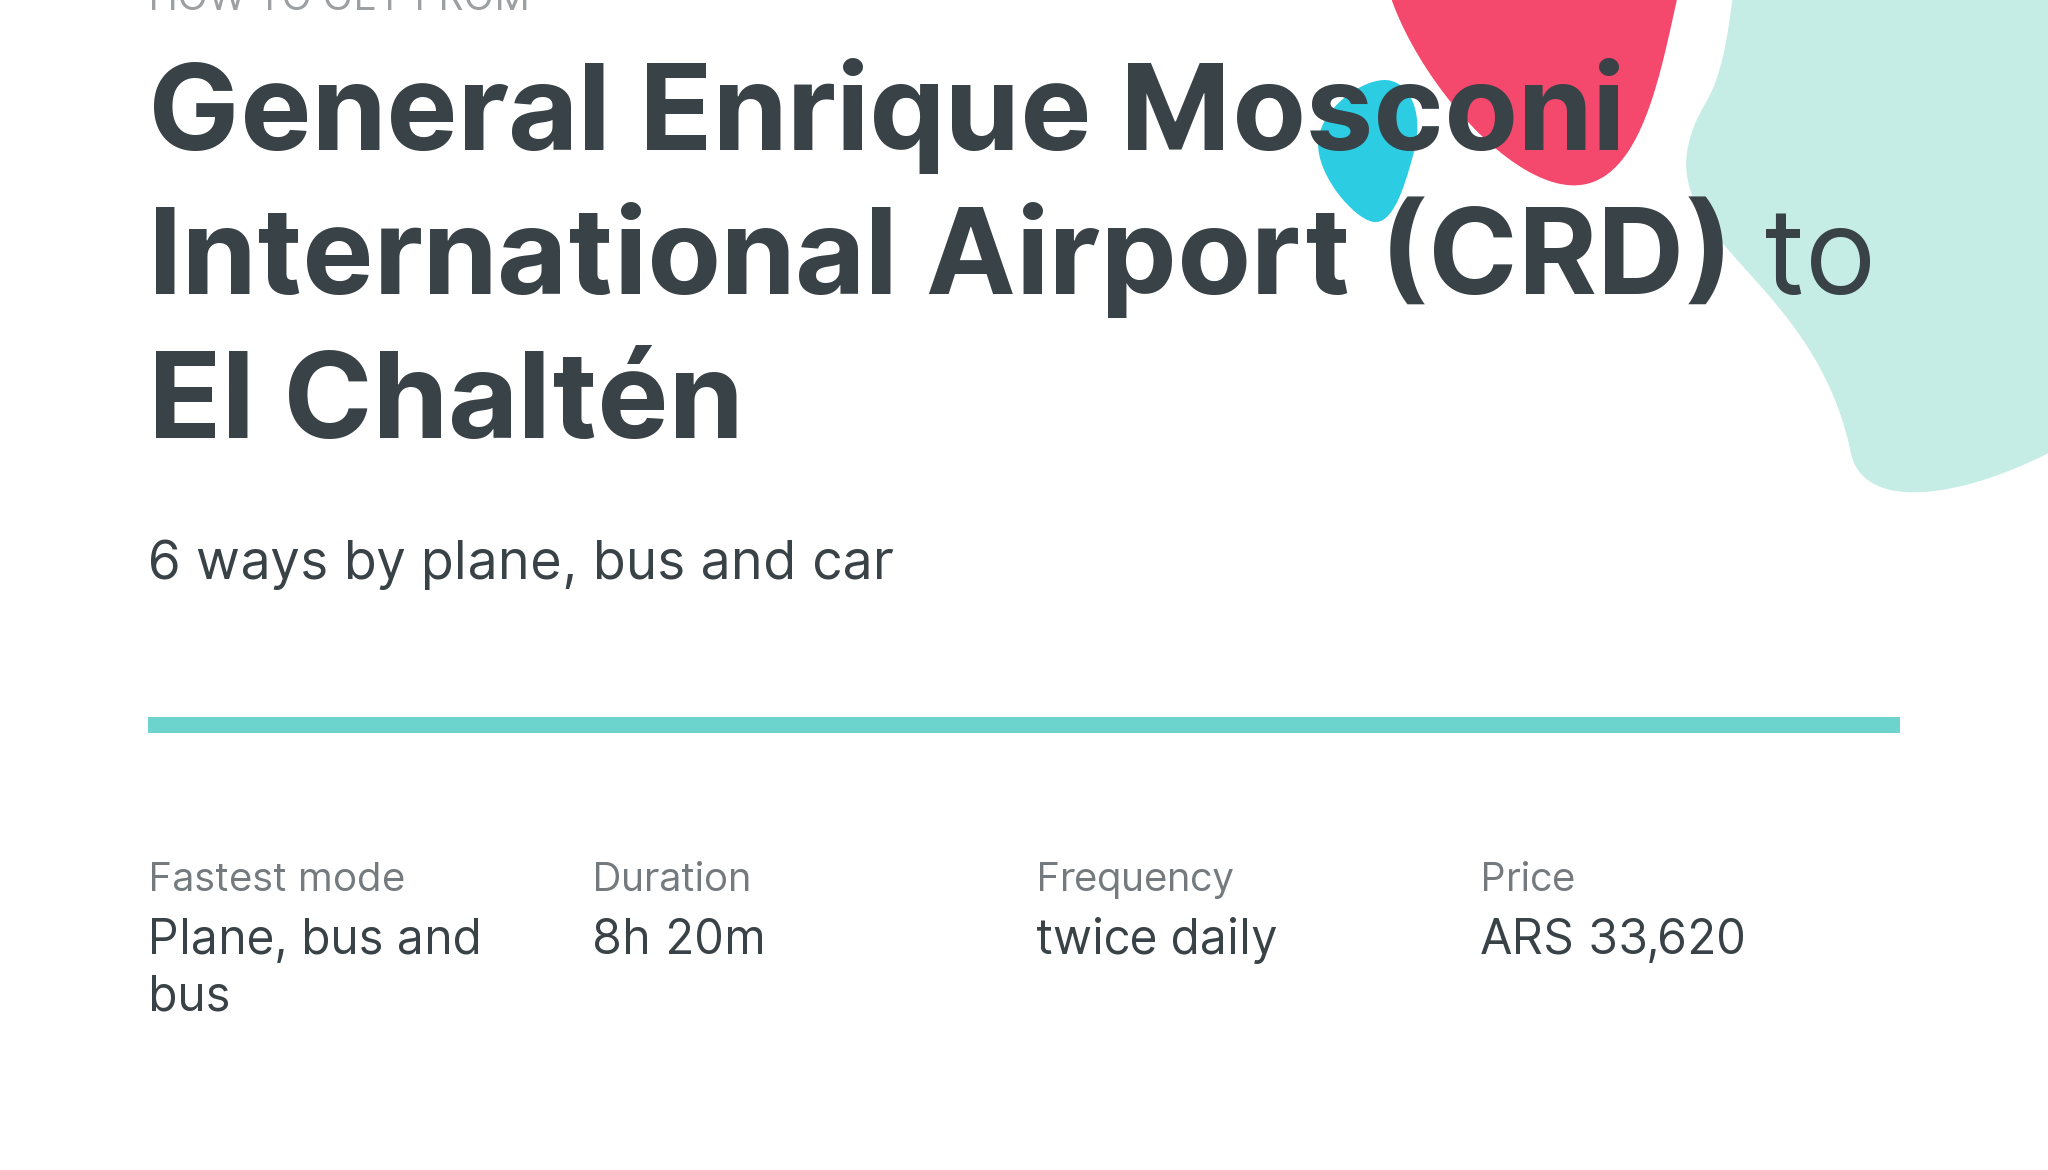 How do I get from General Enrique Mosconi International Airport (CRD) to El Chaltén